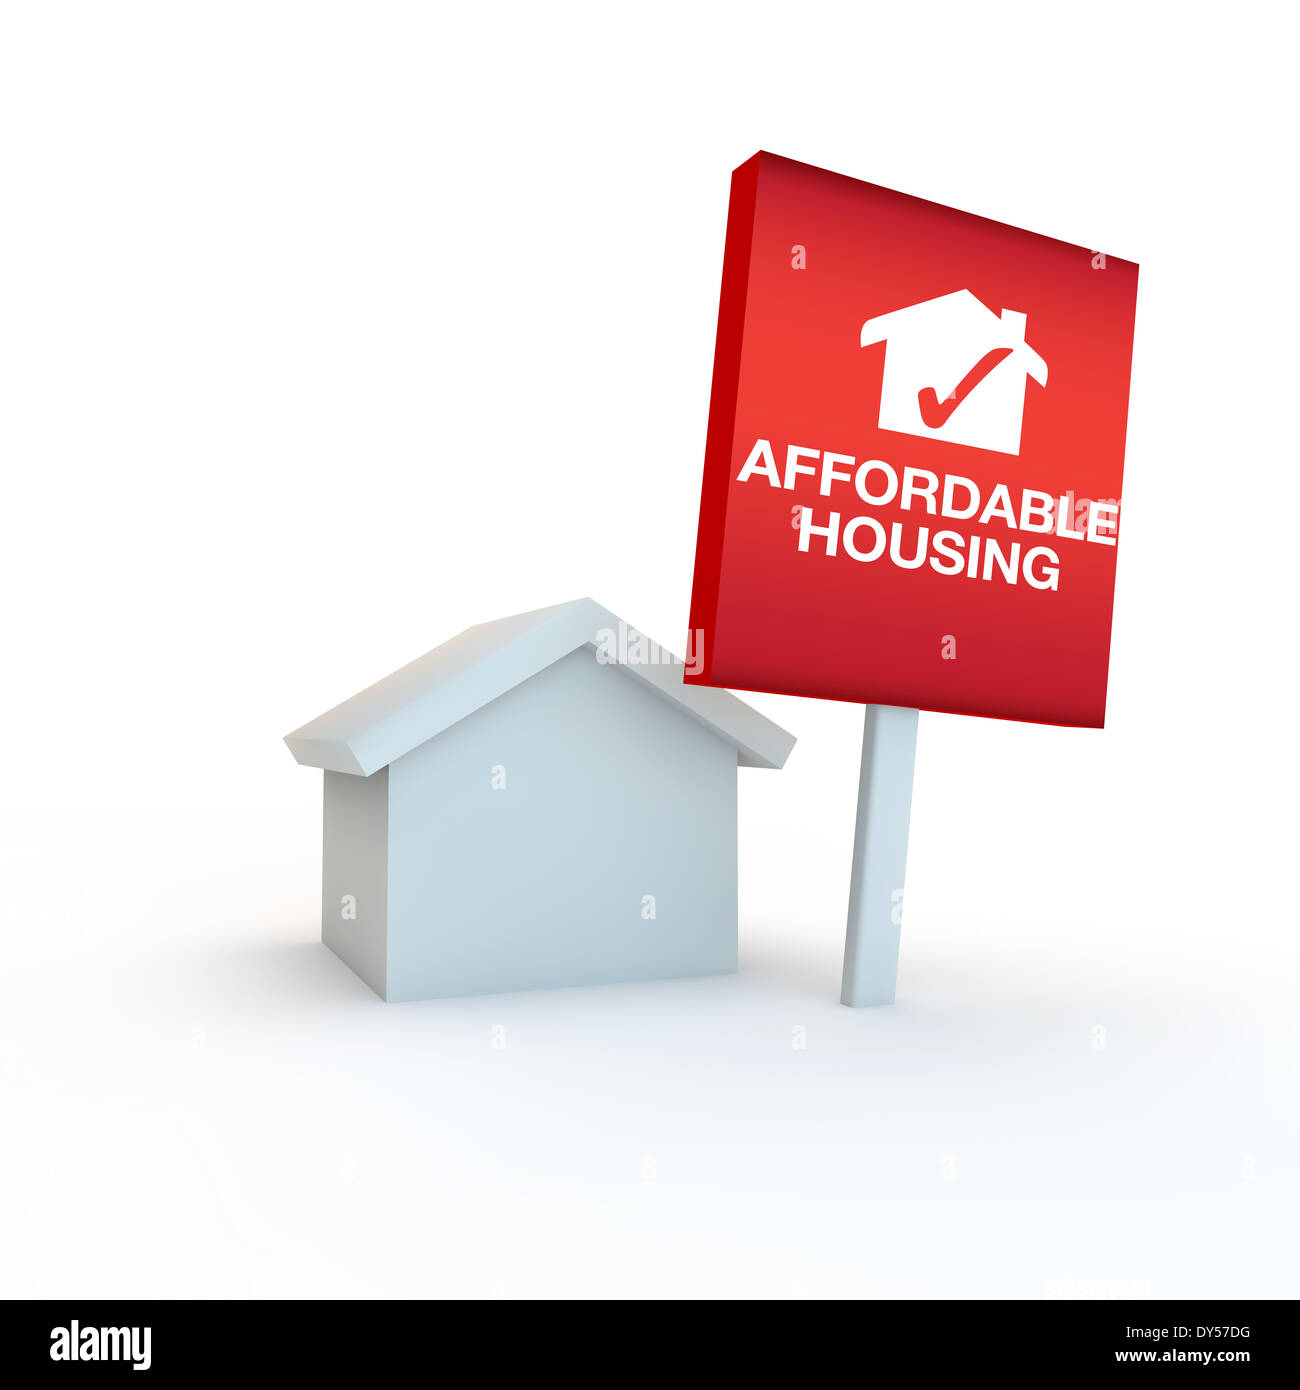 icon to represent affordable housing with home and sign Stock Photo